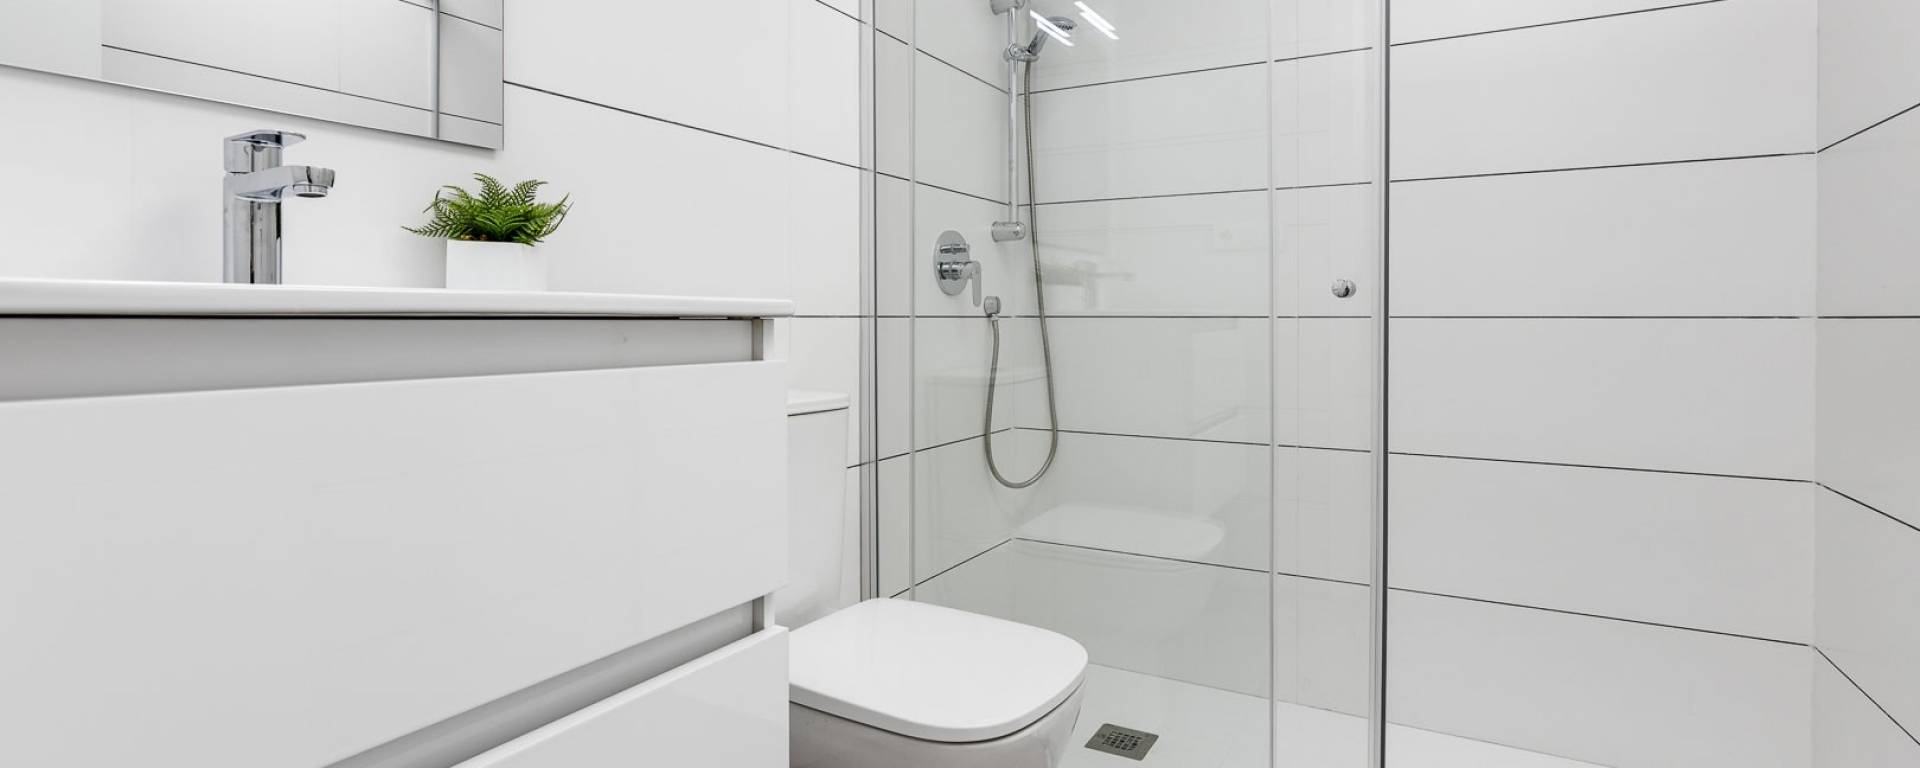 Apartment for sale in Costa calida, Velapi´s Guests Bathroom